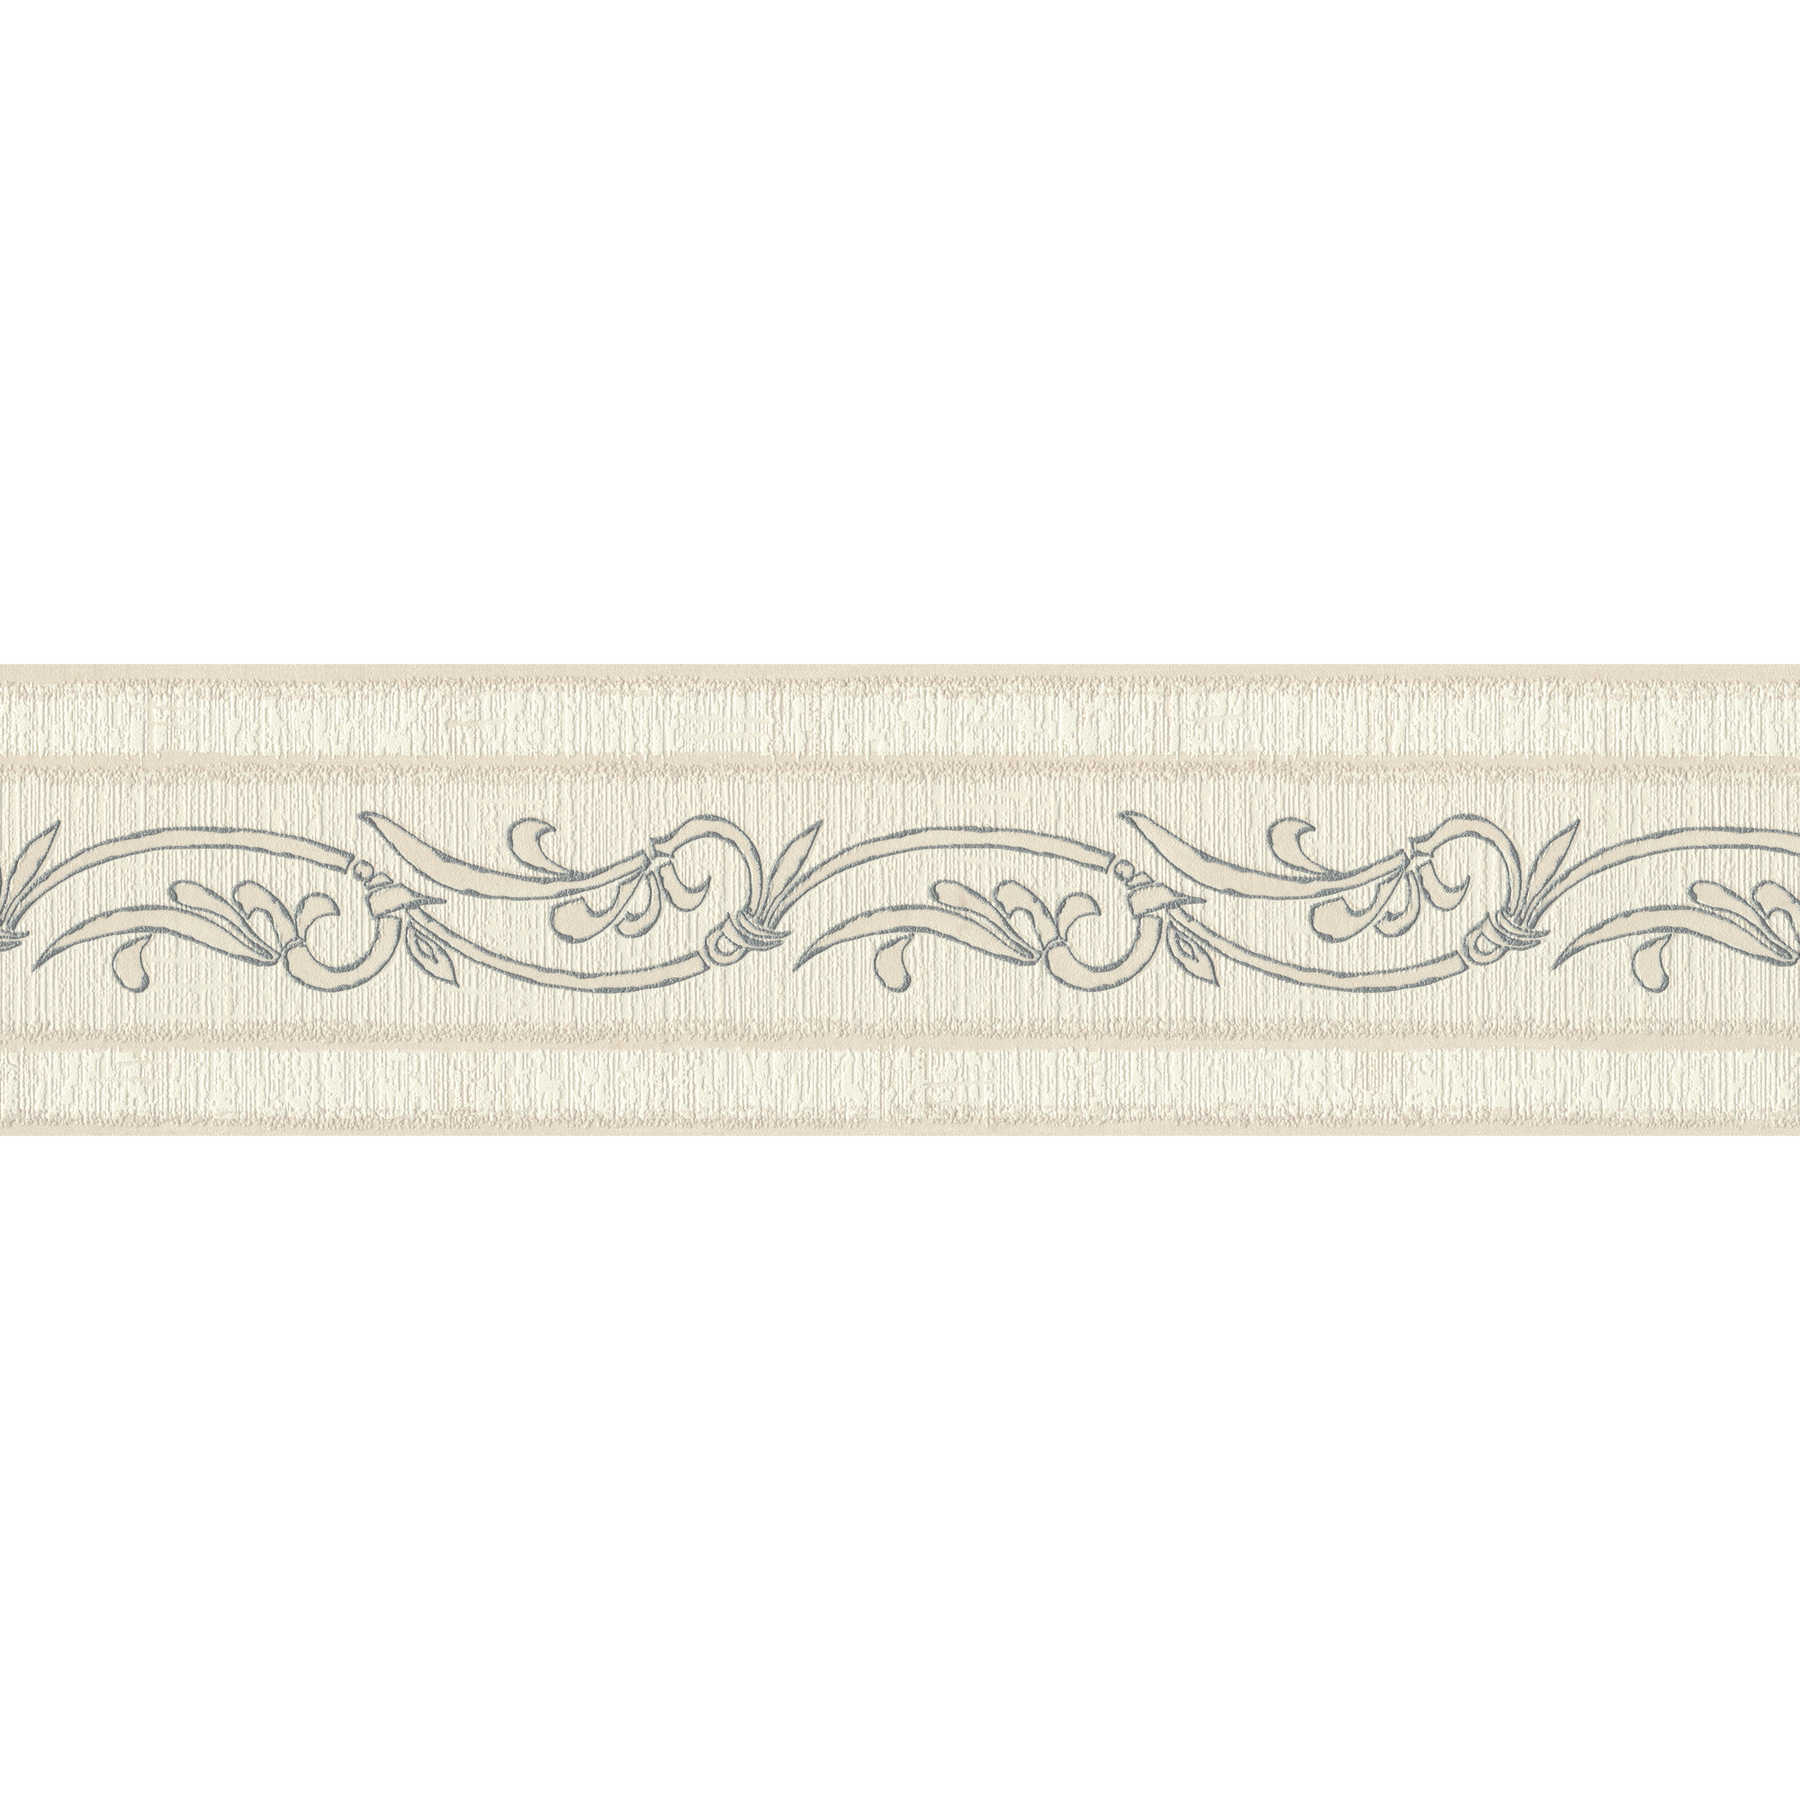 Border with Ornaments, Metallic Accent & Textured Pattern - Beige, Silver
